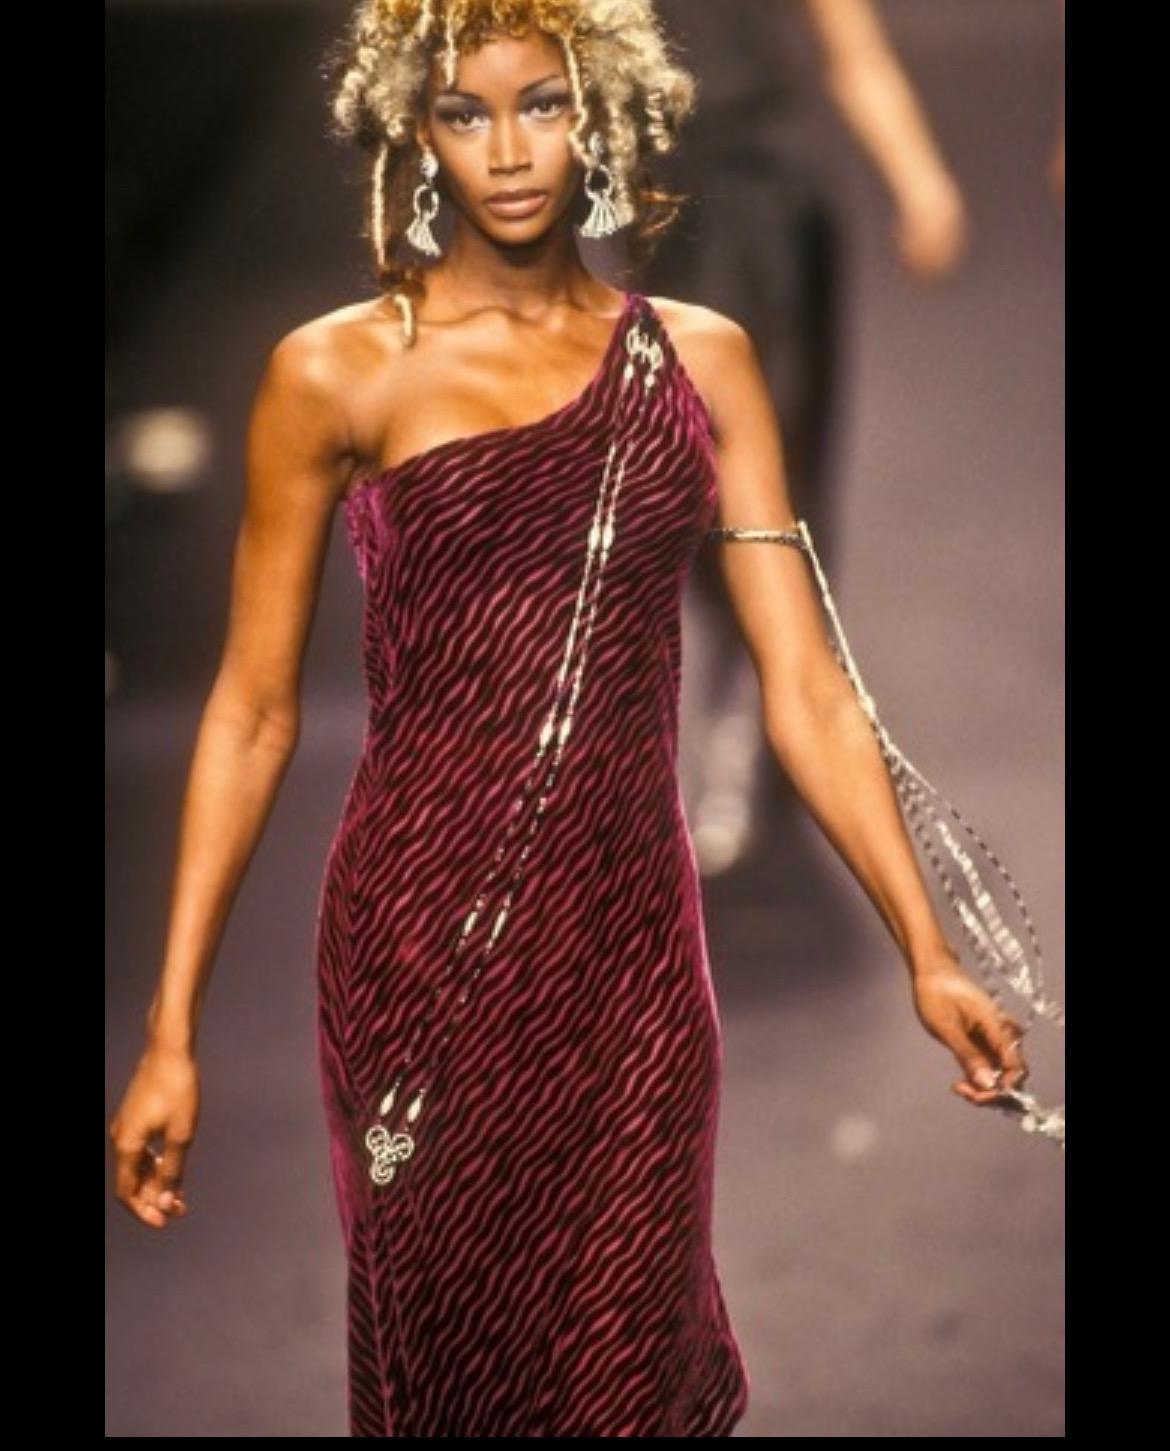 Presenting a fabulous brown velvet Karl Lagerfeld dress. From the Fall/Winter 1994 collection, the dress debuted on the season's runway in a pink and black variation with the same abstract velvet devoré pattern atop a light chiffon base. This dress